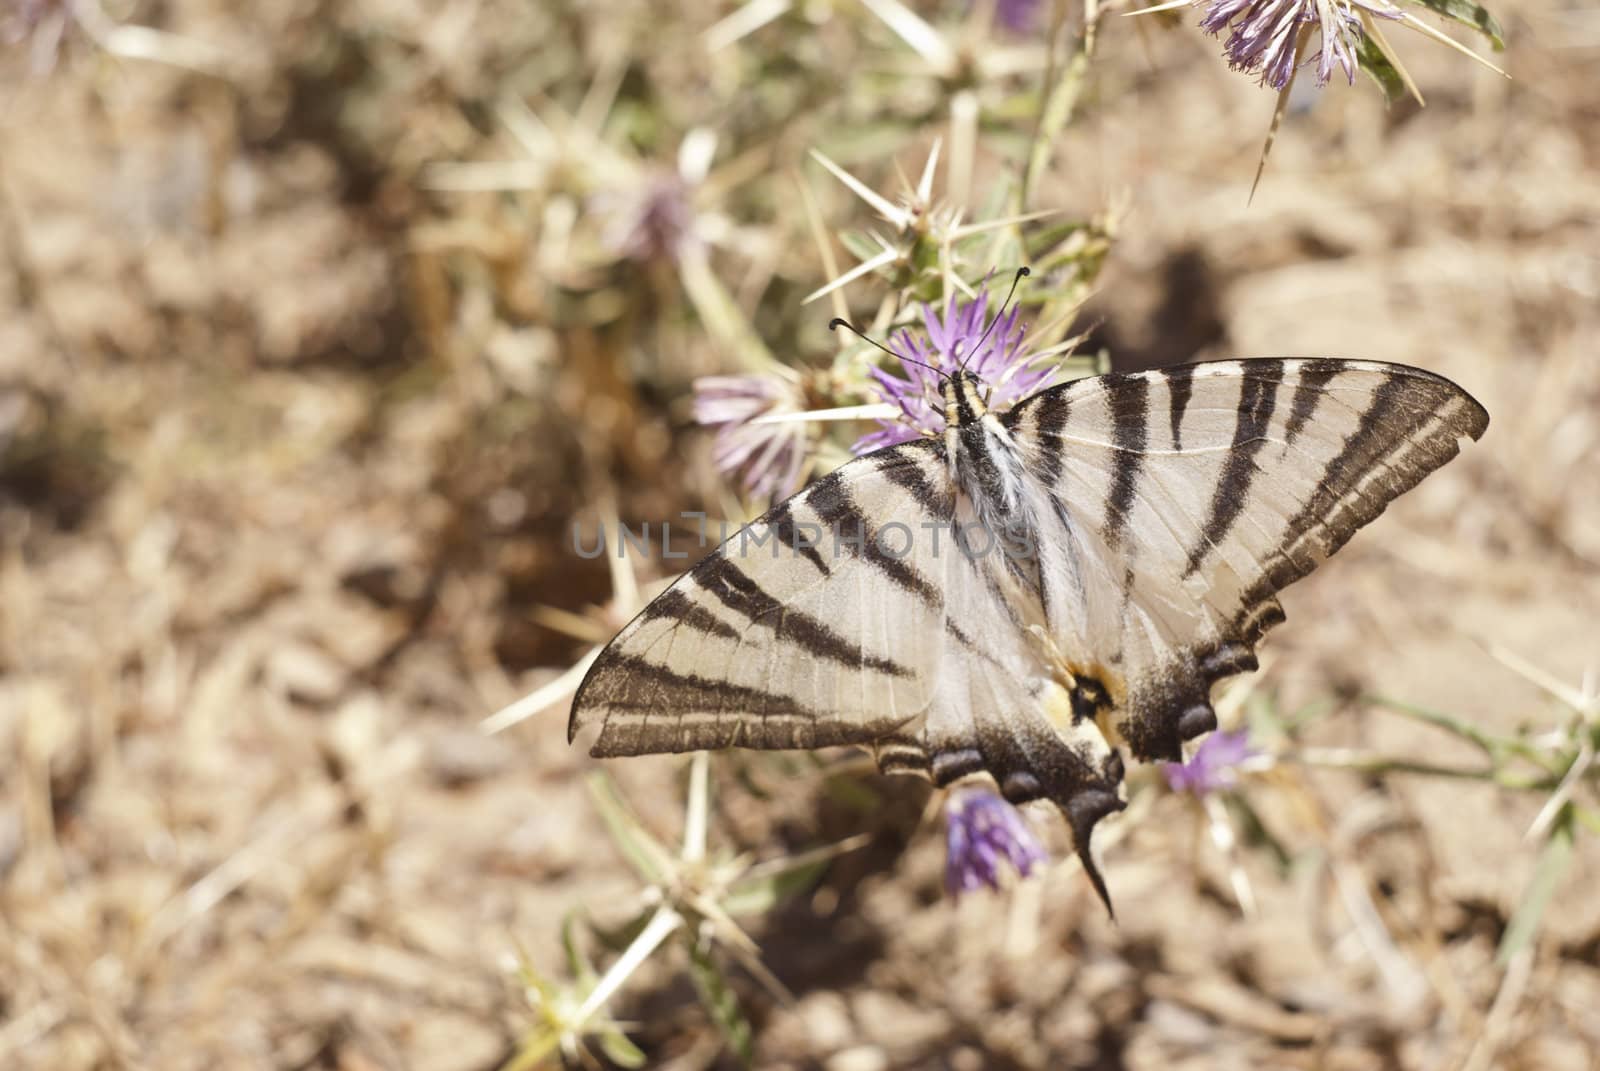 Butterfly on a flower in sicilian countryside. Nebrodi mountains